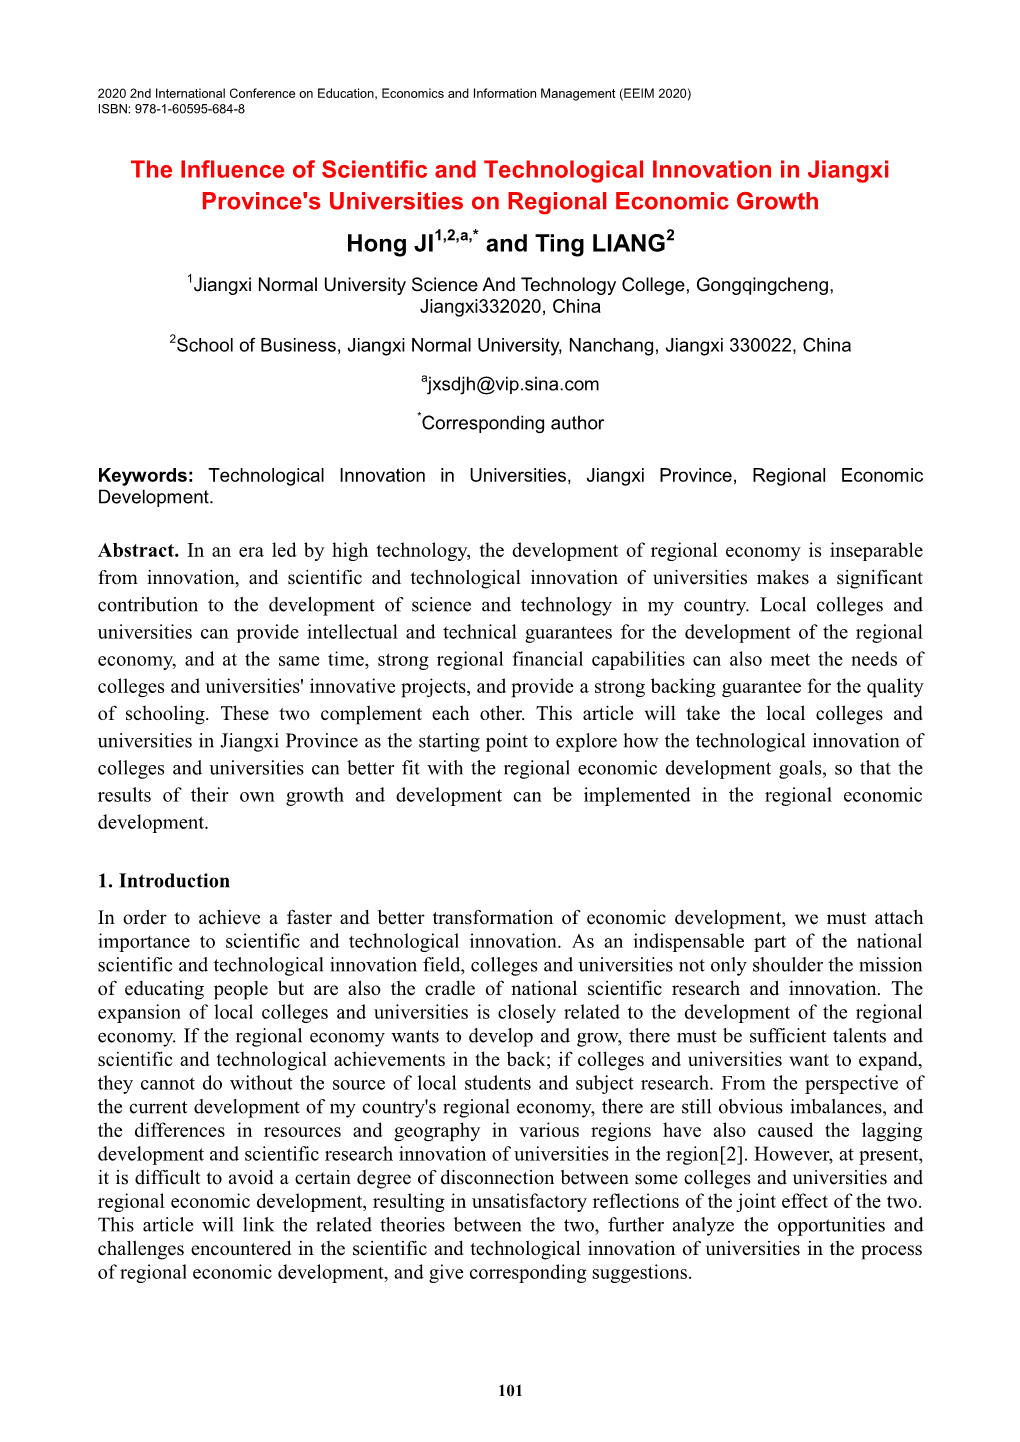 The Influence of Scientific and Technological Innovation in Jiangxi Province's Universities on Regional Economic Growth Hong JI1,2,A,* and Ting LIANG2